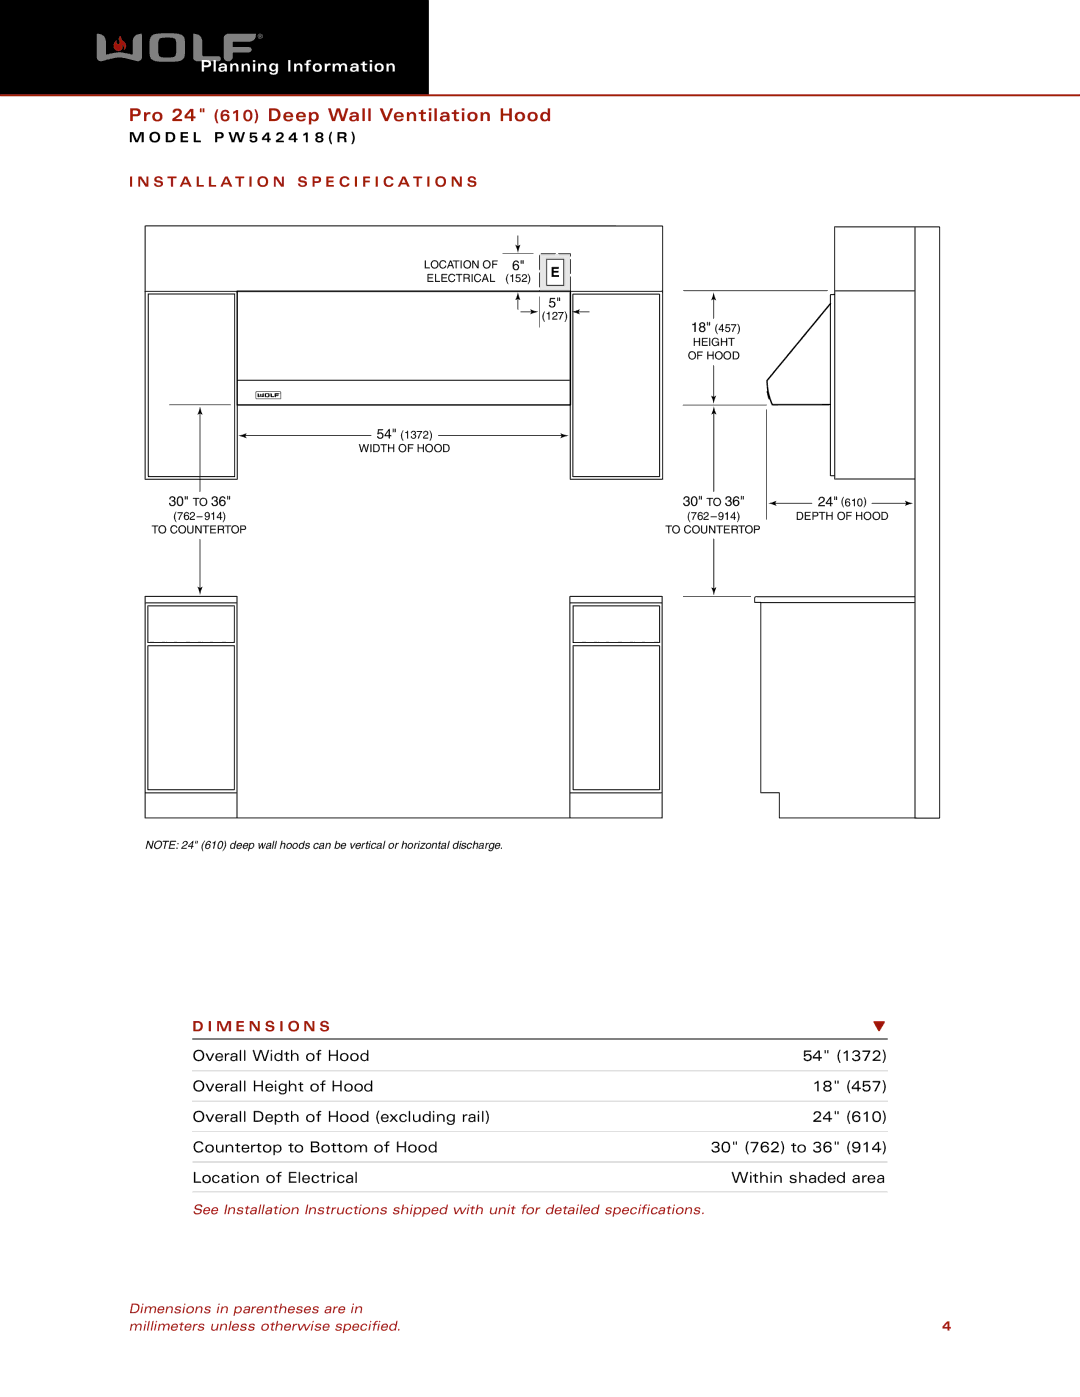 Wolf Appliance Company PW542418R dimensions Installation Specification S, M E N S I O N S 